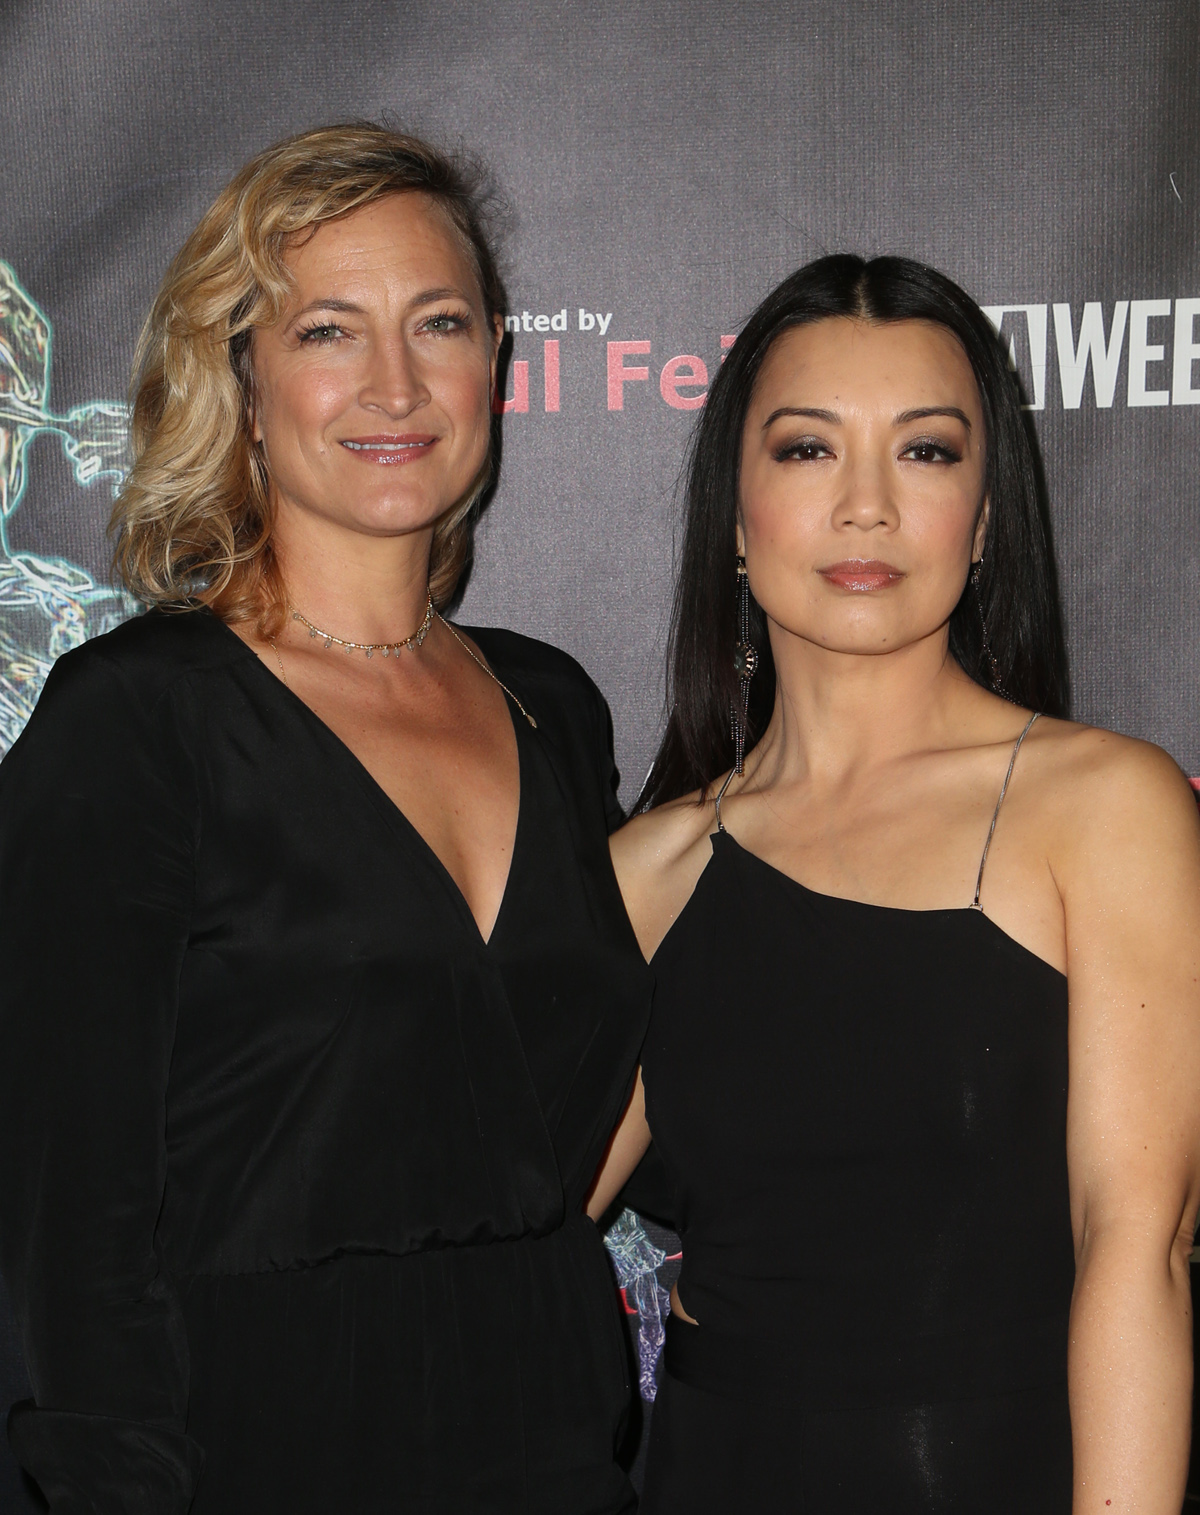 BEVERLY HILLS, CA - APRIL 26: Zoe Bell, Ming-Na Wen, at the 2018 Artemis Awards Gala at the Ahrya Fine Arts Theater in Beverly Hills, California on April 26, 2018. Credit: Faye Sadou/MediaPunch